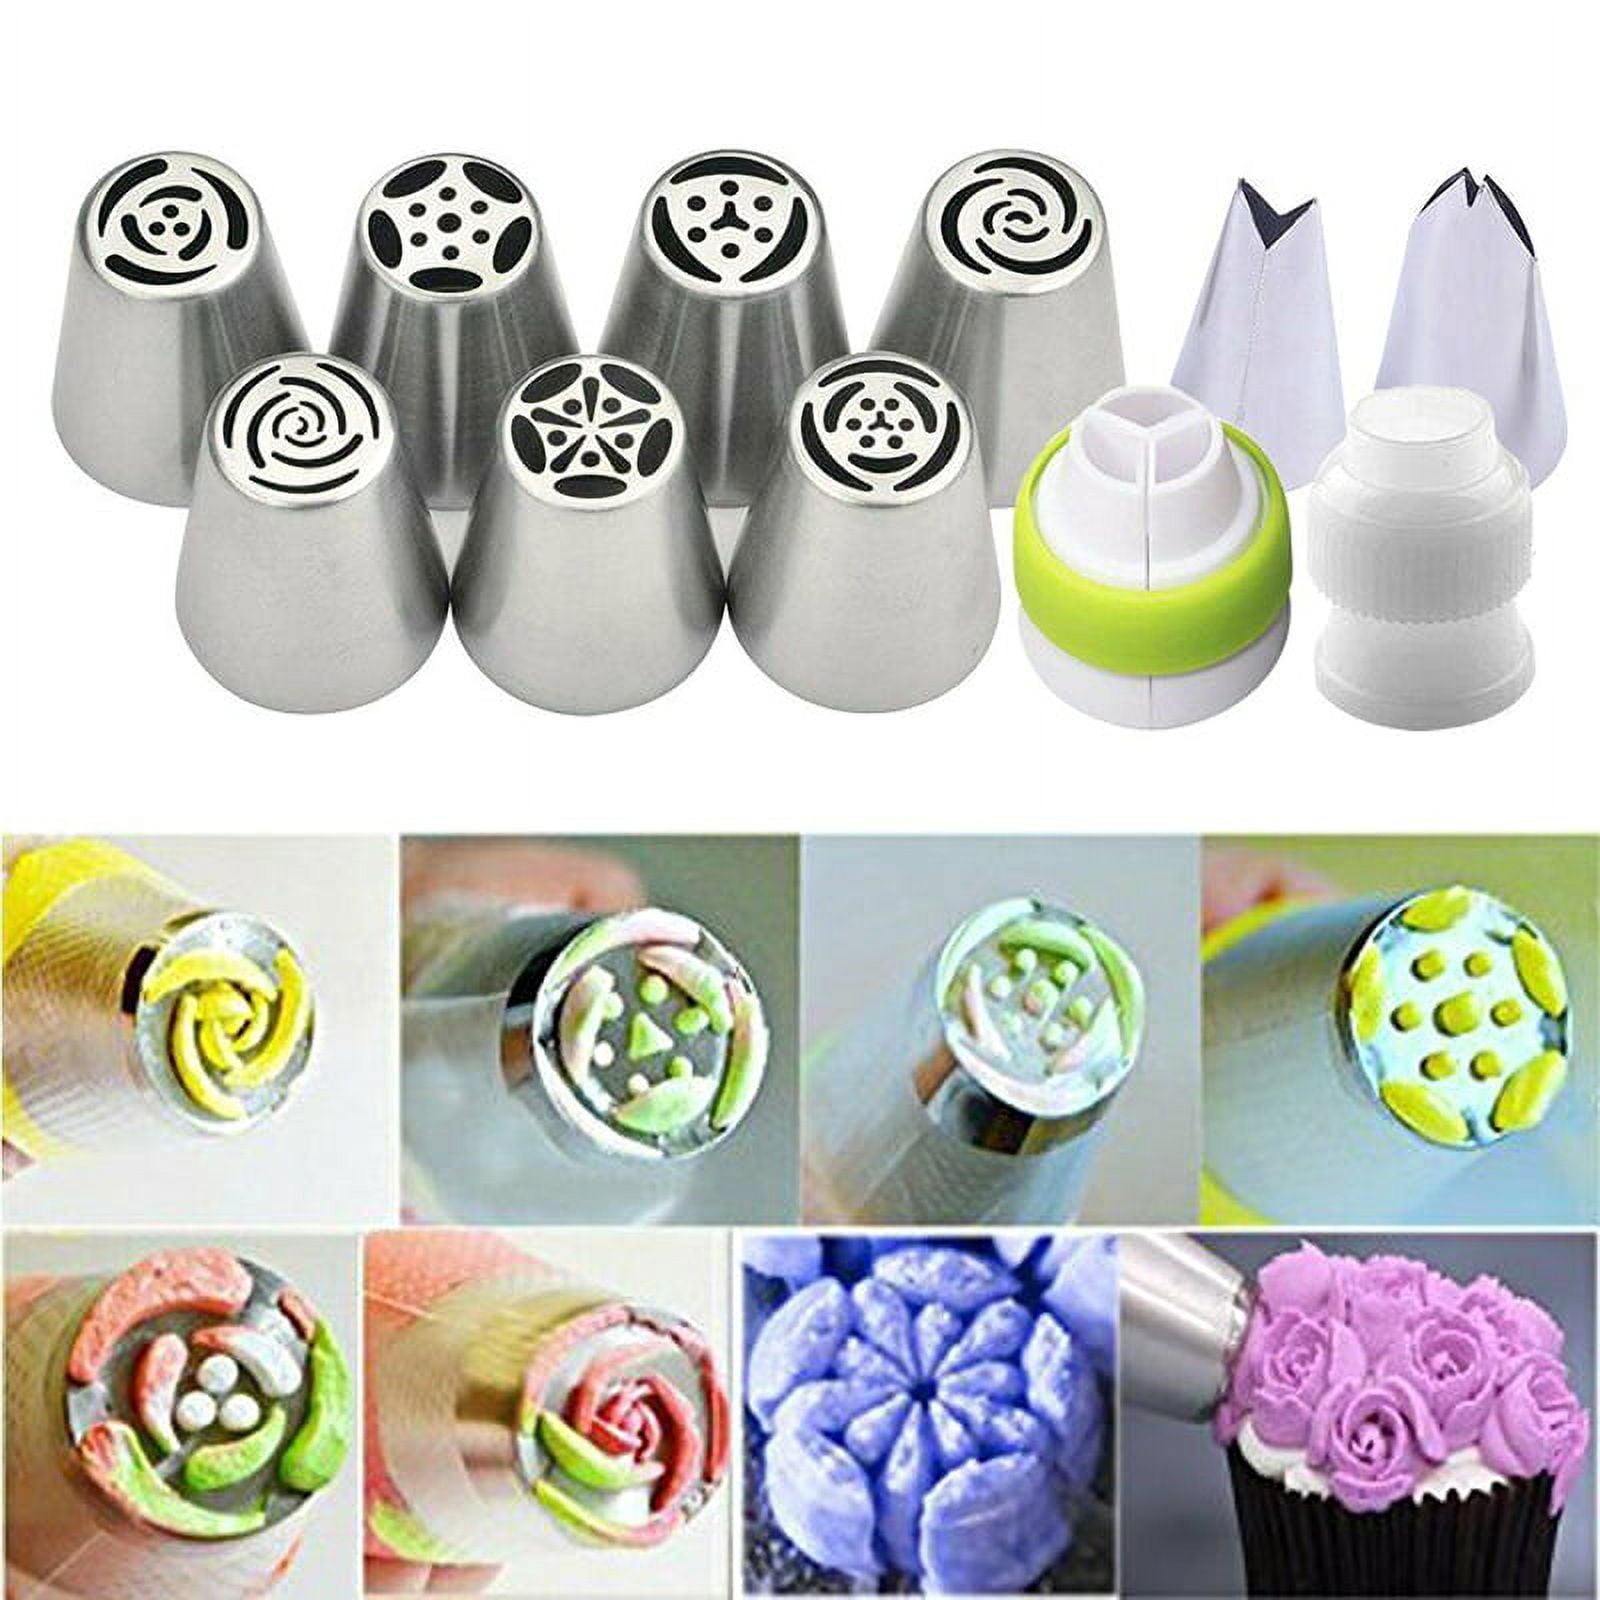 207PCS Cake Decorating Supplies - Gift For Women - Cake Decorating Kit with  Cake Turntable, 34 Piping Tips, 100 Disposable Icing Bags, 40 Cupcake  Liners, 8 Fondant Tools, 5 Measuring Spoons and More 